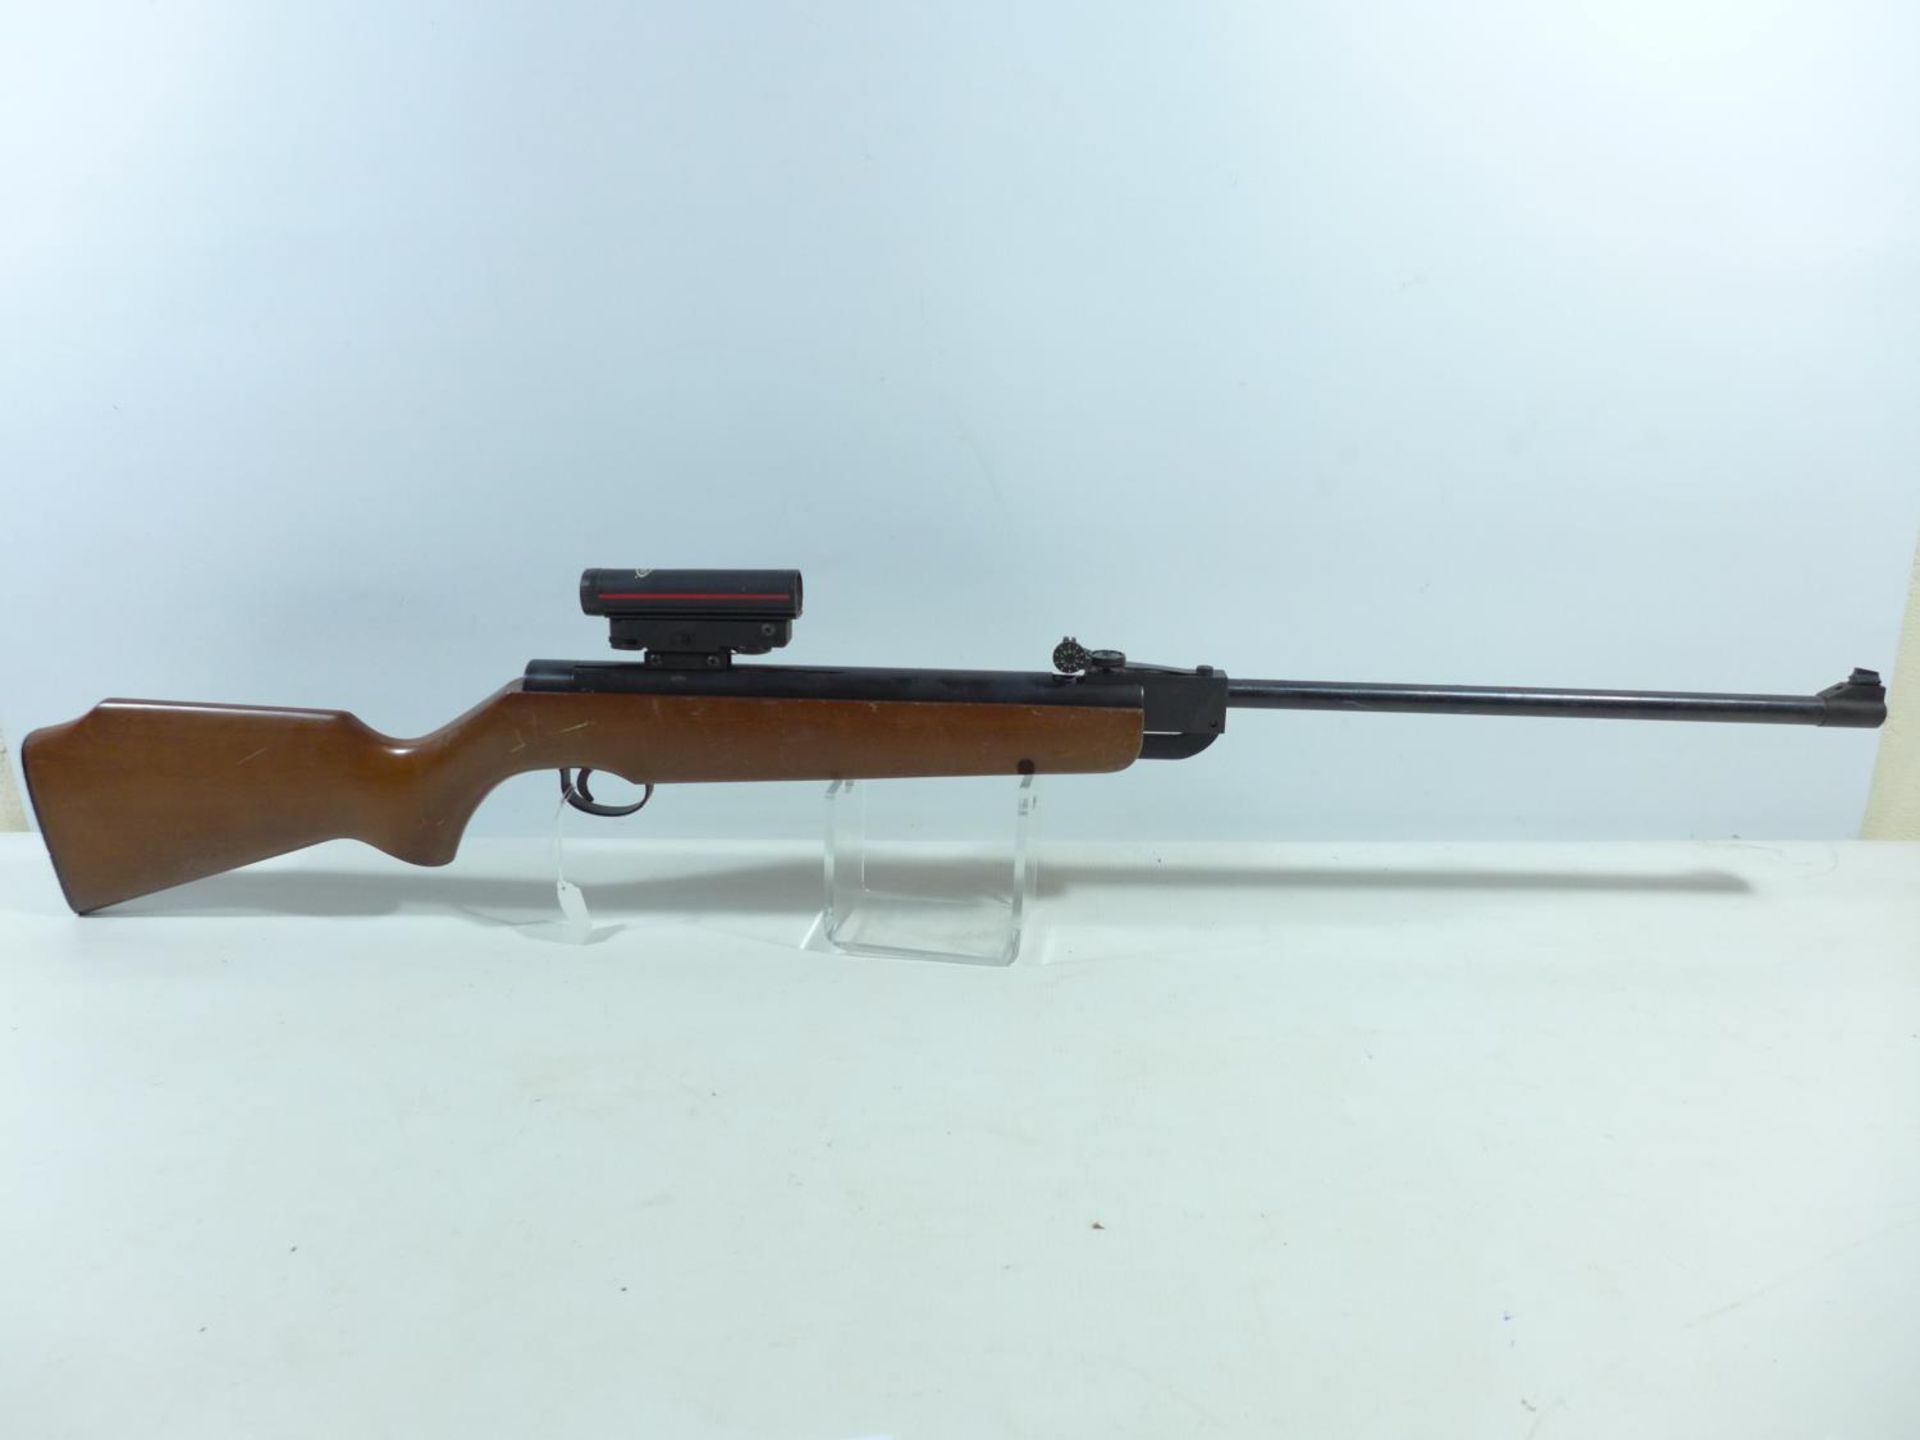 A WEBLEY AND SCOTT EXCEL .22 CALIBRE AIR RIFLE, 44CM BARREL, SERIAL NUMBER 831825, FITTED WITH